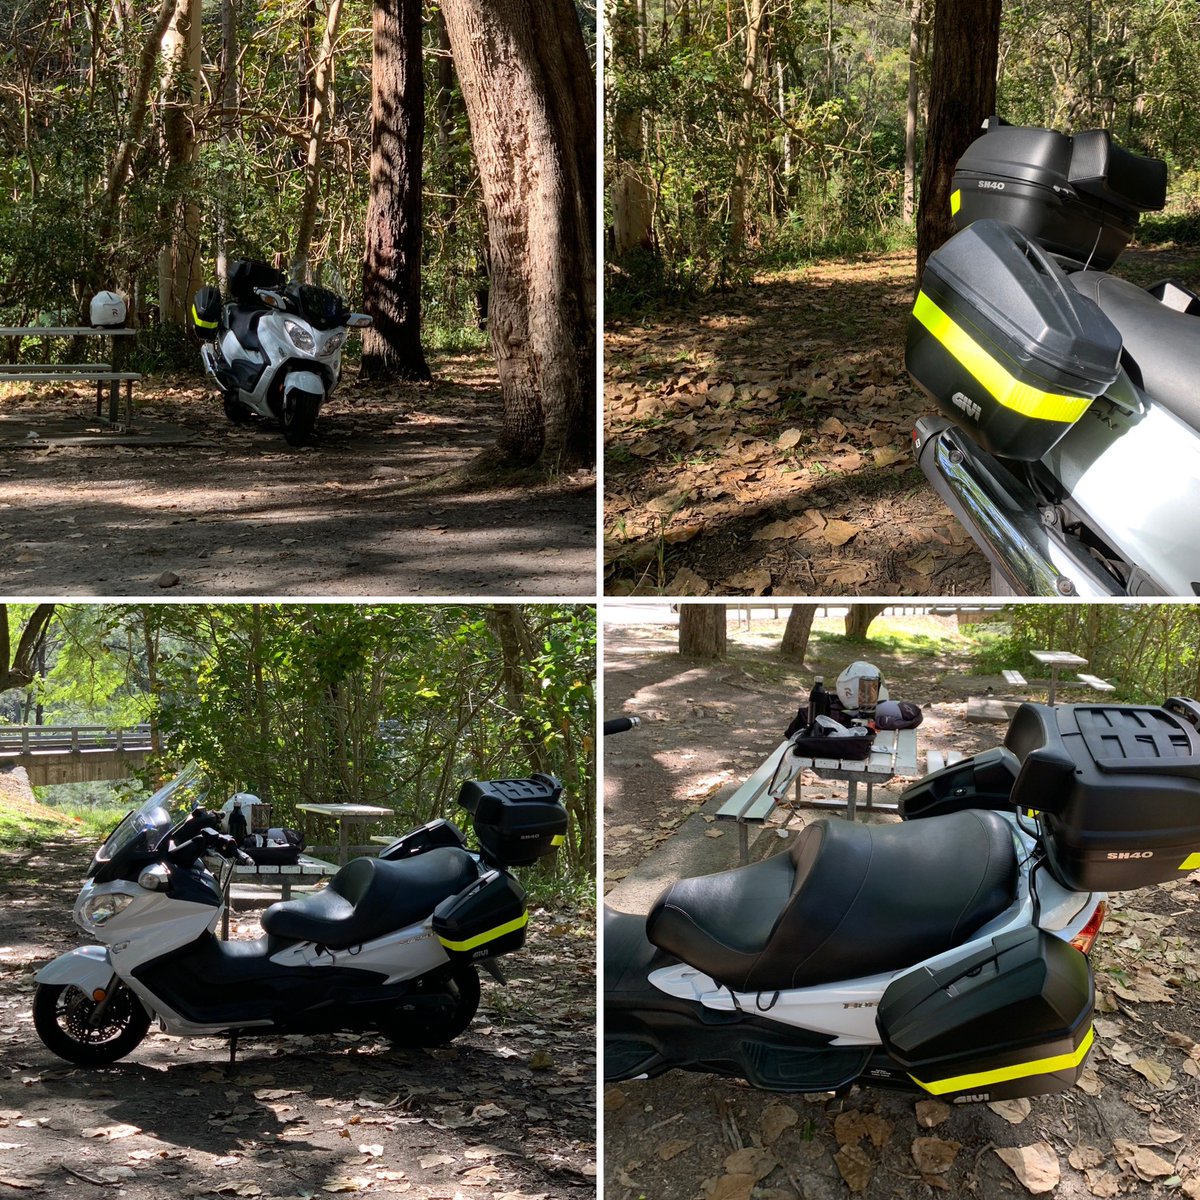 The road from Mudgeeraba to Springbrook has been closed for some time due to catastrophic weather events. But there is still 10km of excellent road to ride. Went out there yesterday. Came back through Worongary & Gilston nice roads too, in perfect weather. Trip 72km. #Burgman650